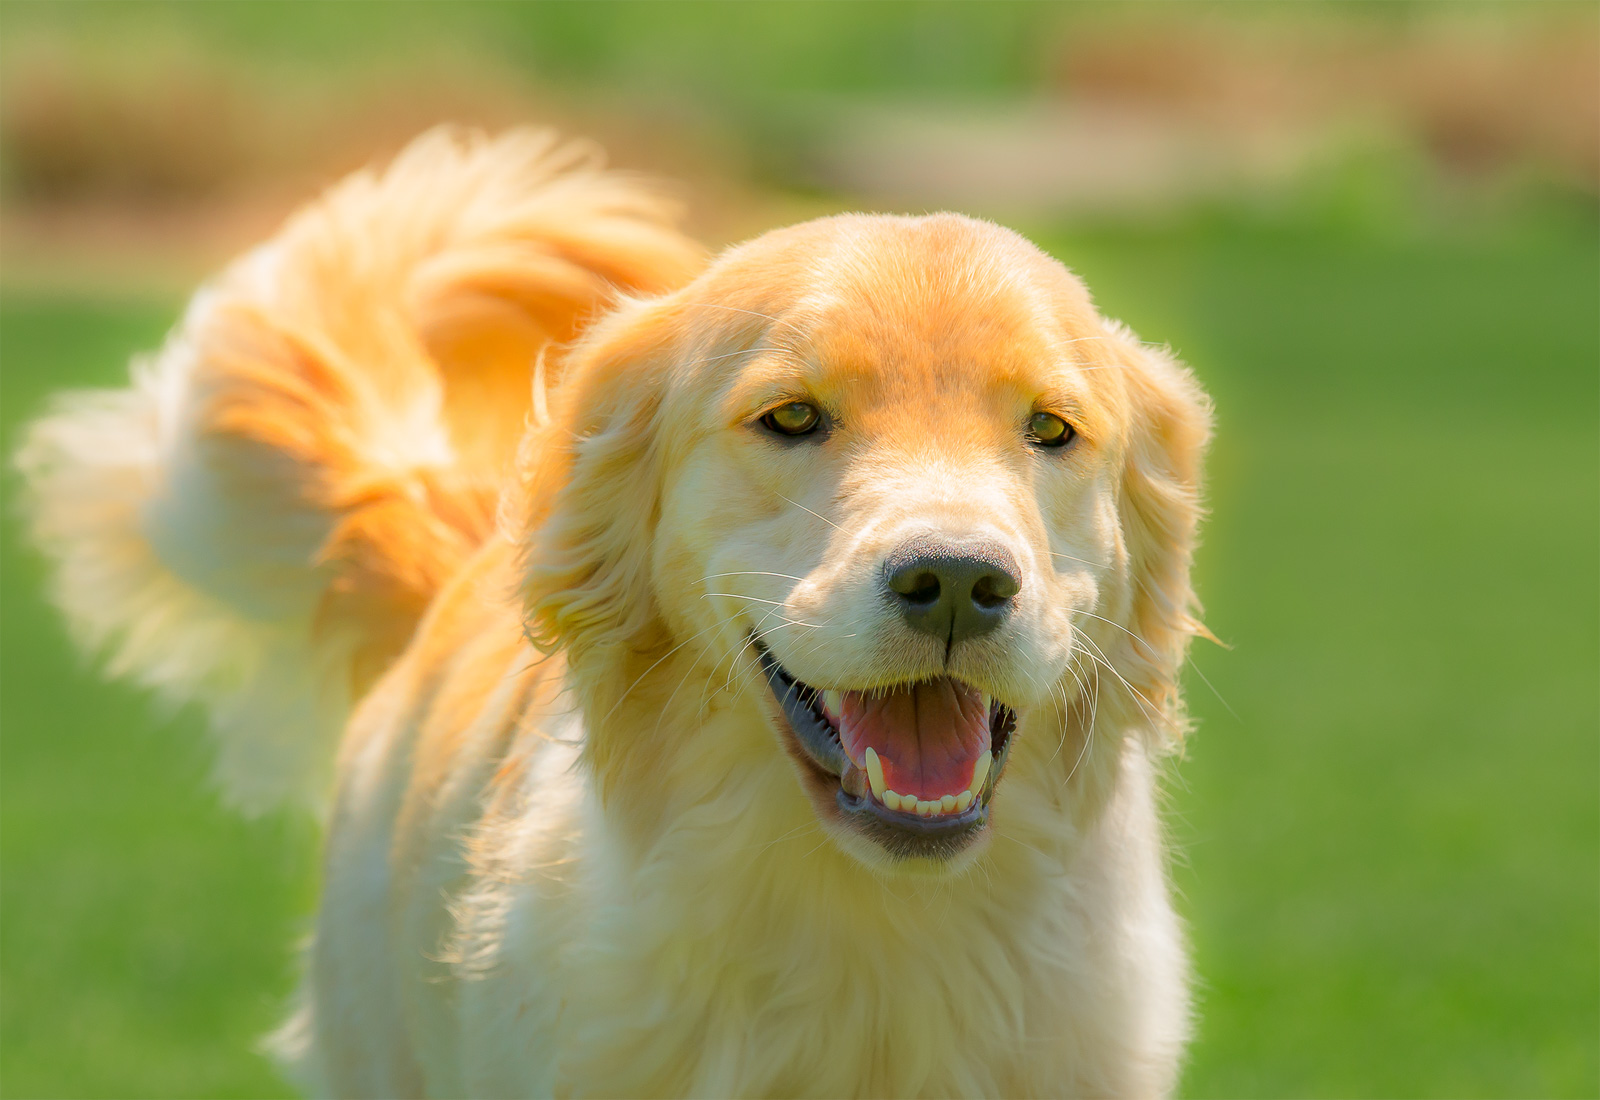 Golden Retriever Puppy Smiling while Prancing